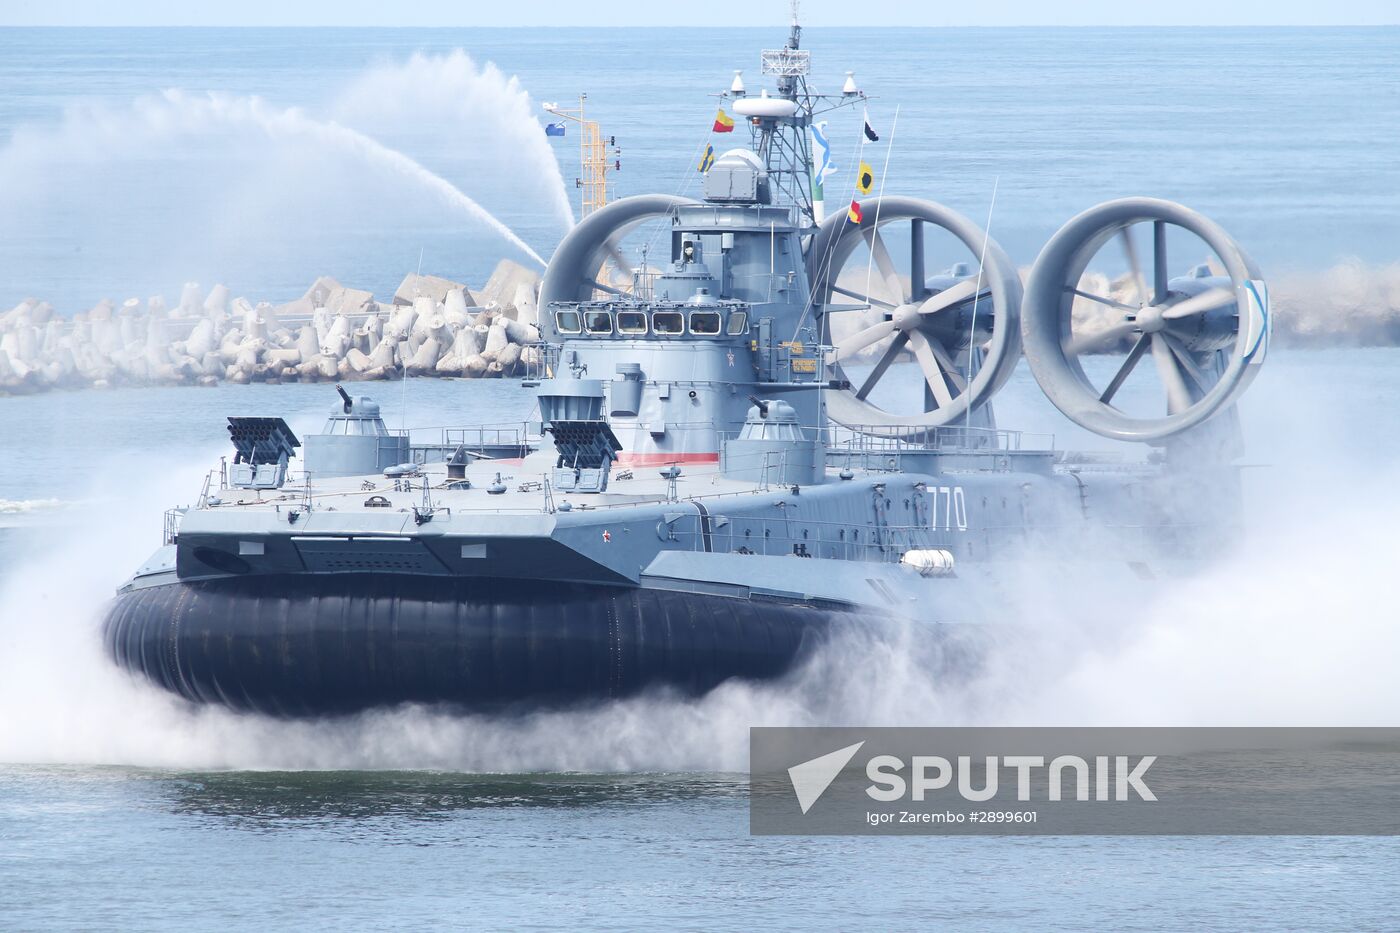 Final rehearsal of parade to mark Russian Navy Day in Baltiysk